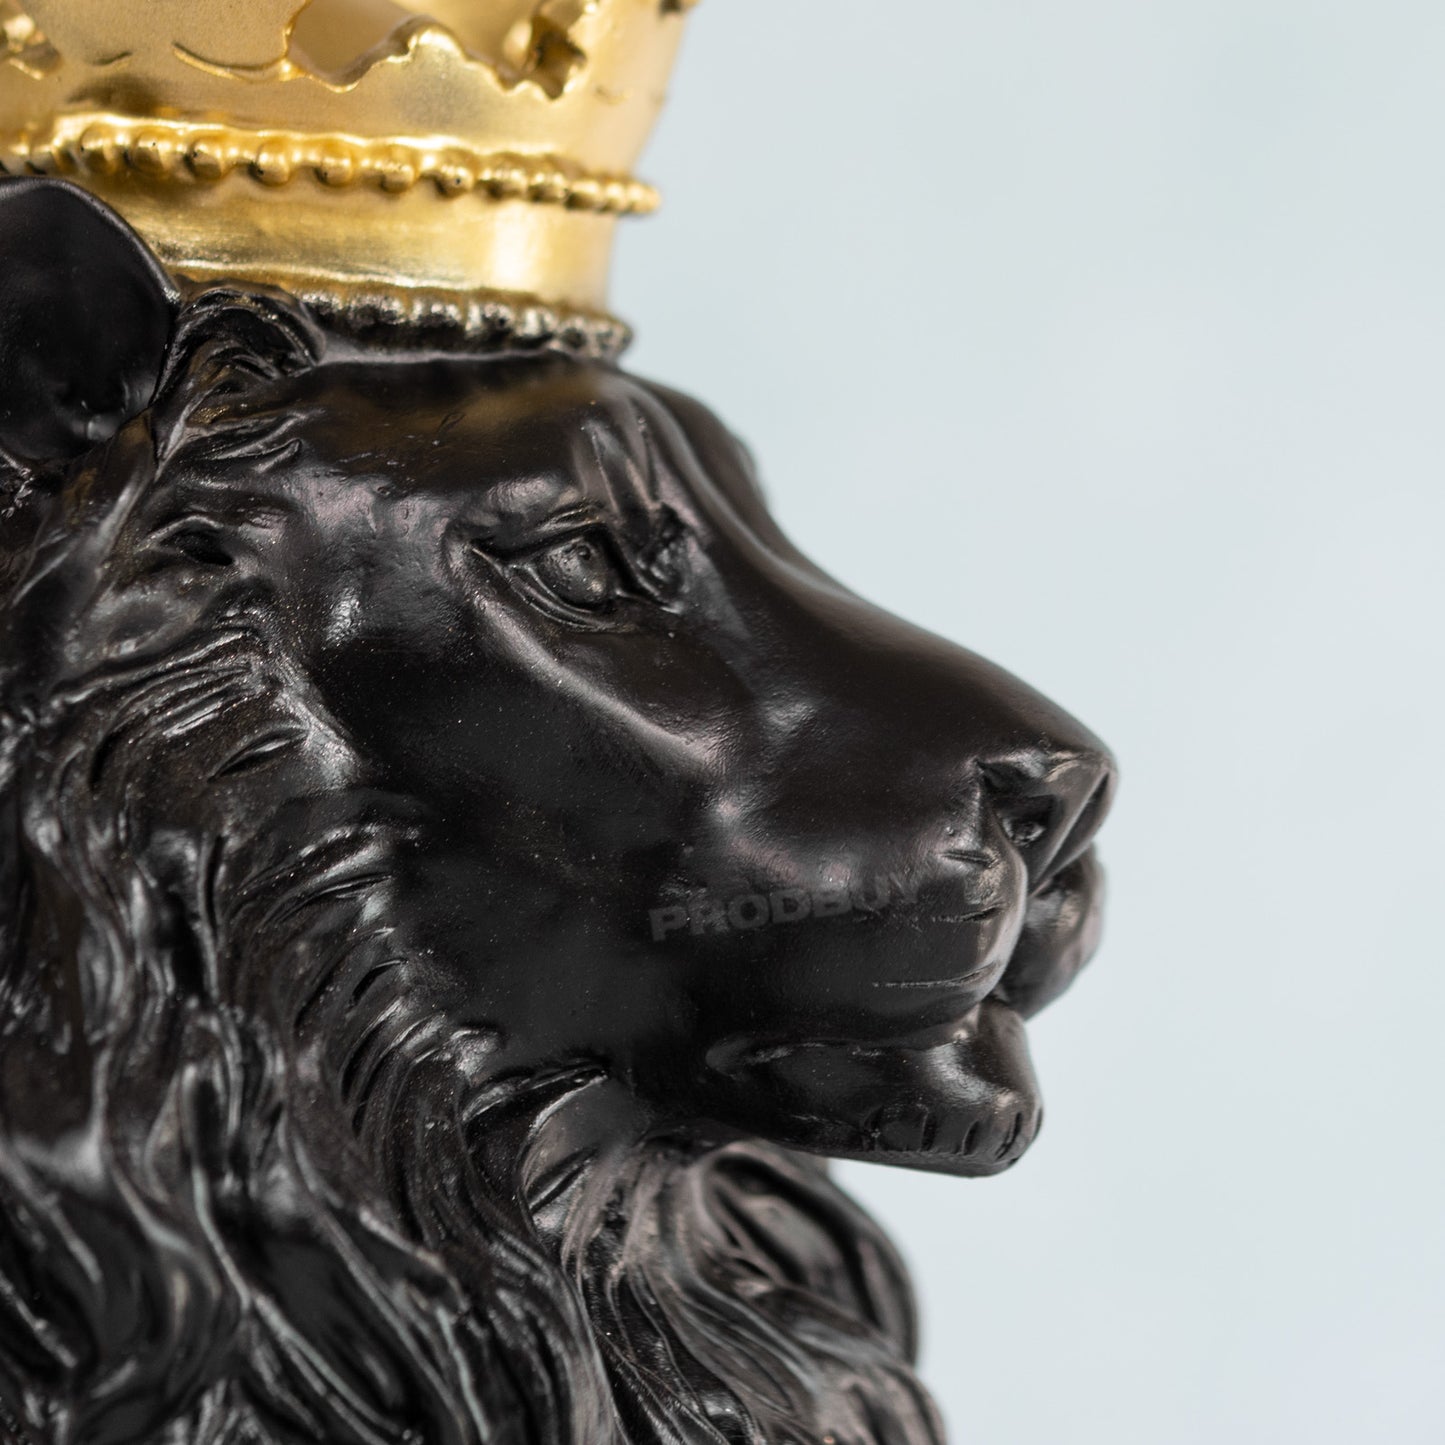 Sitting Black Lion with Gold Crown 28cm Tall Ornament